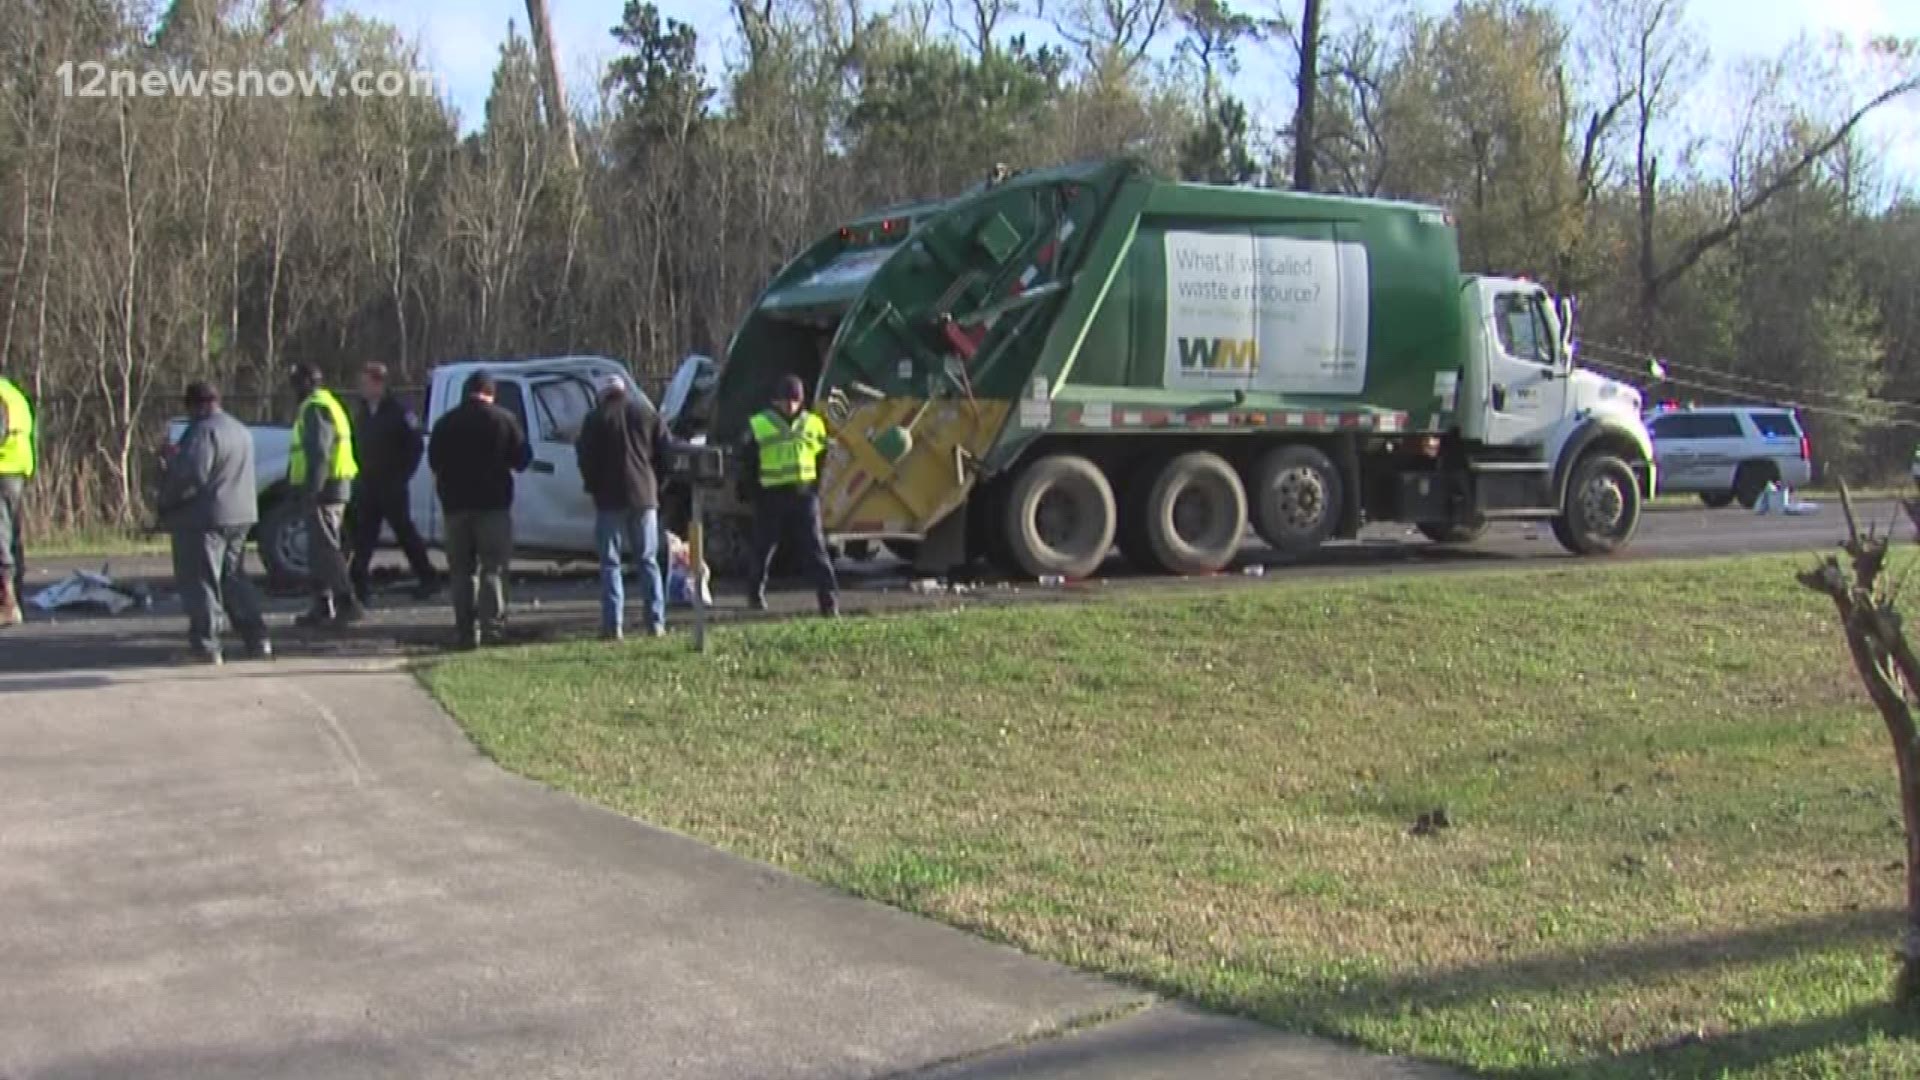 Another waste management truck involved in serious accident in Orange